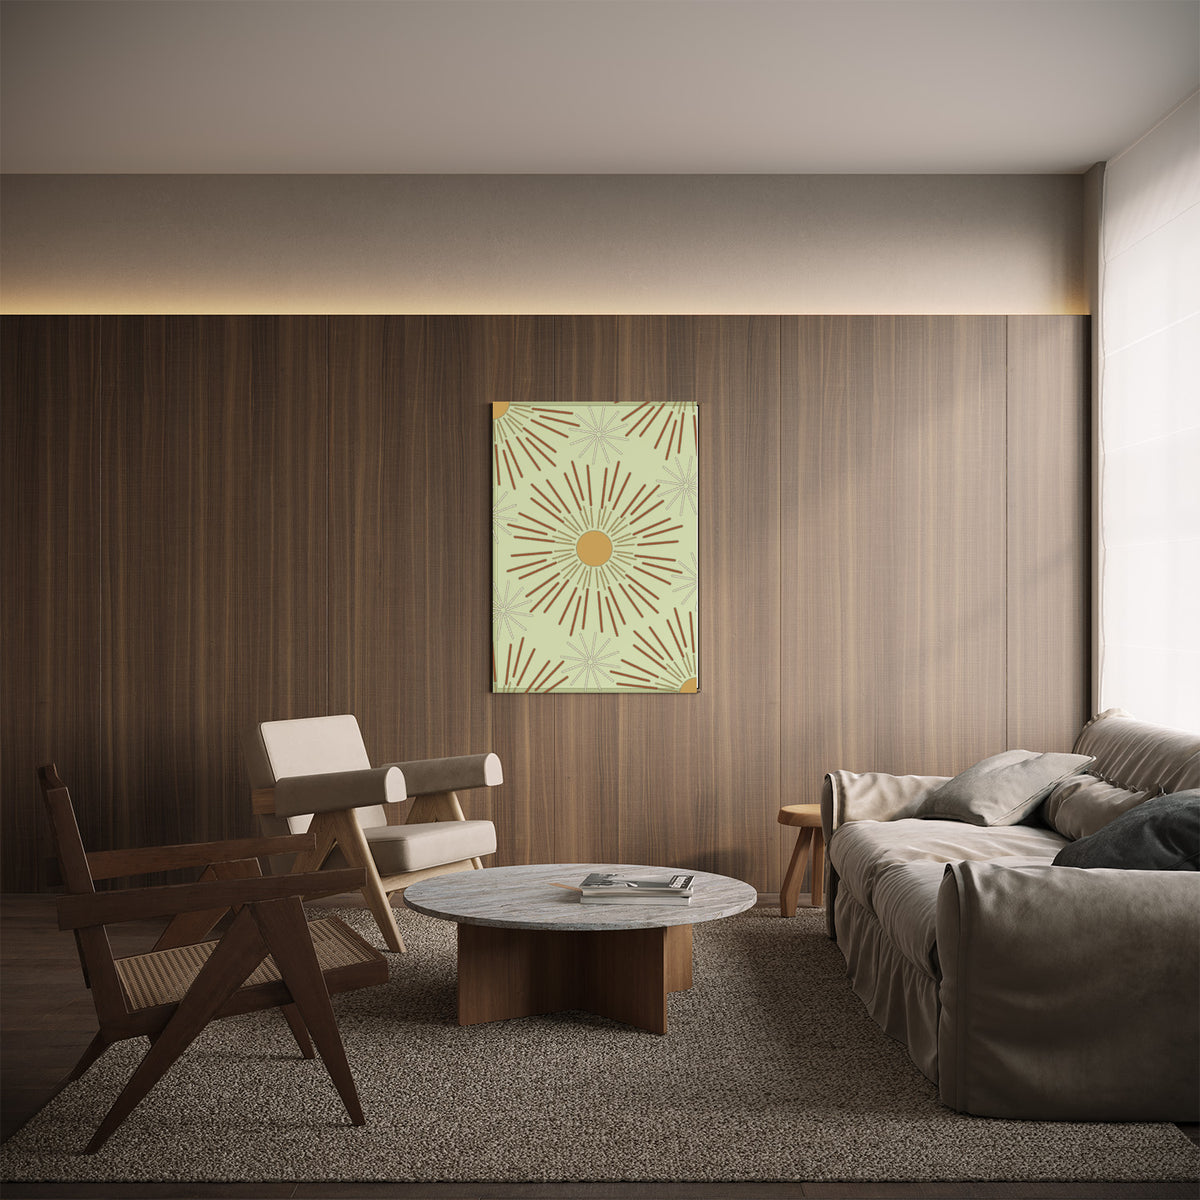 Geometric star-like pattern around circle/. Similar to a spoke wheel pattern. Portion of the appear iin each corner. Pattern colors includes browns, tans, shades of maize yellow color. The background is a blend of green, and yellow. The GeoPattern Wall Art is 24x36 canvas wrap. All  Wall Art canvas wraps  are  print poly-cotton canvas,  hand stretched on pine stretcher bars, and secured by staples. Hardware included for a ready to hang convenience. Made to order. Designer: @makkersmedia